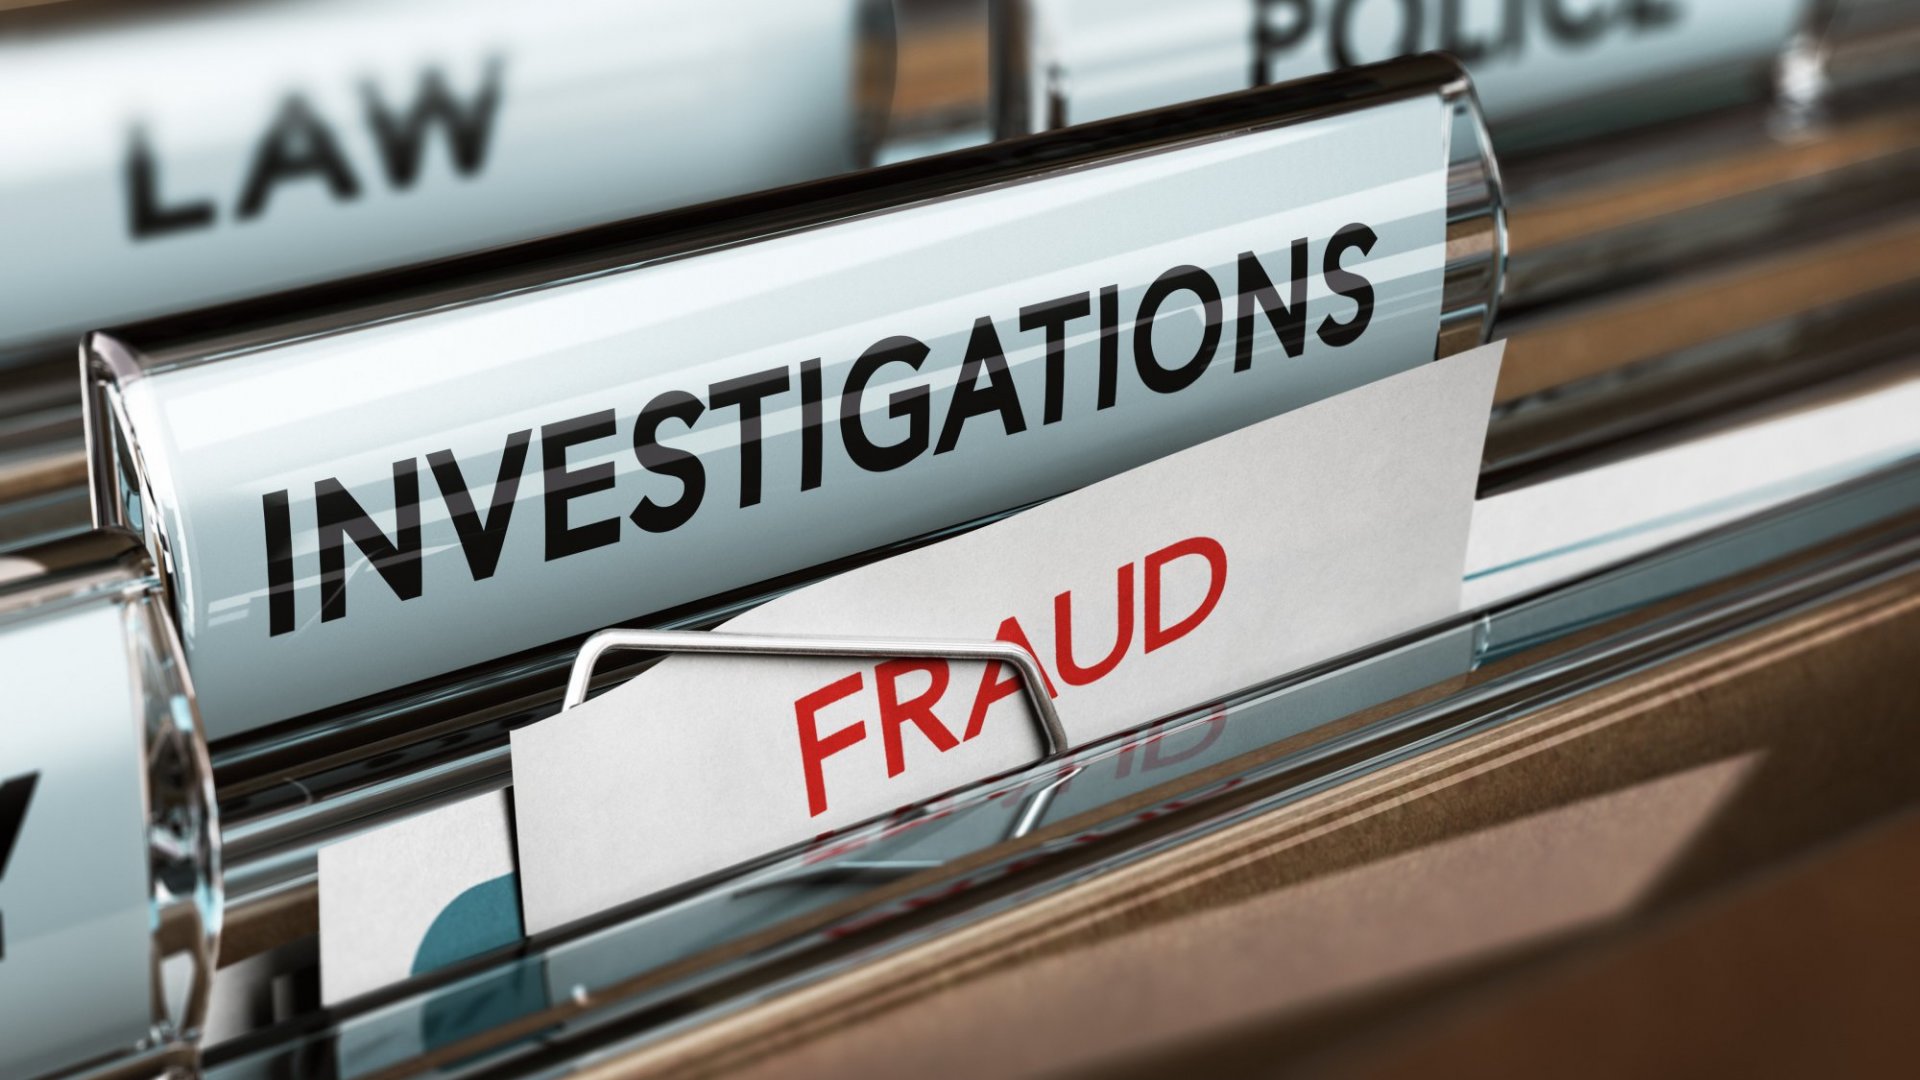 Two Elected Officials Sentenced to Prison for Fraud Schemes